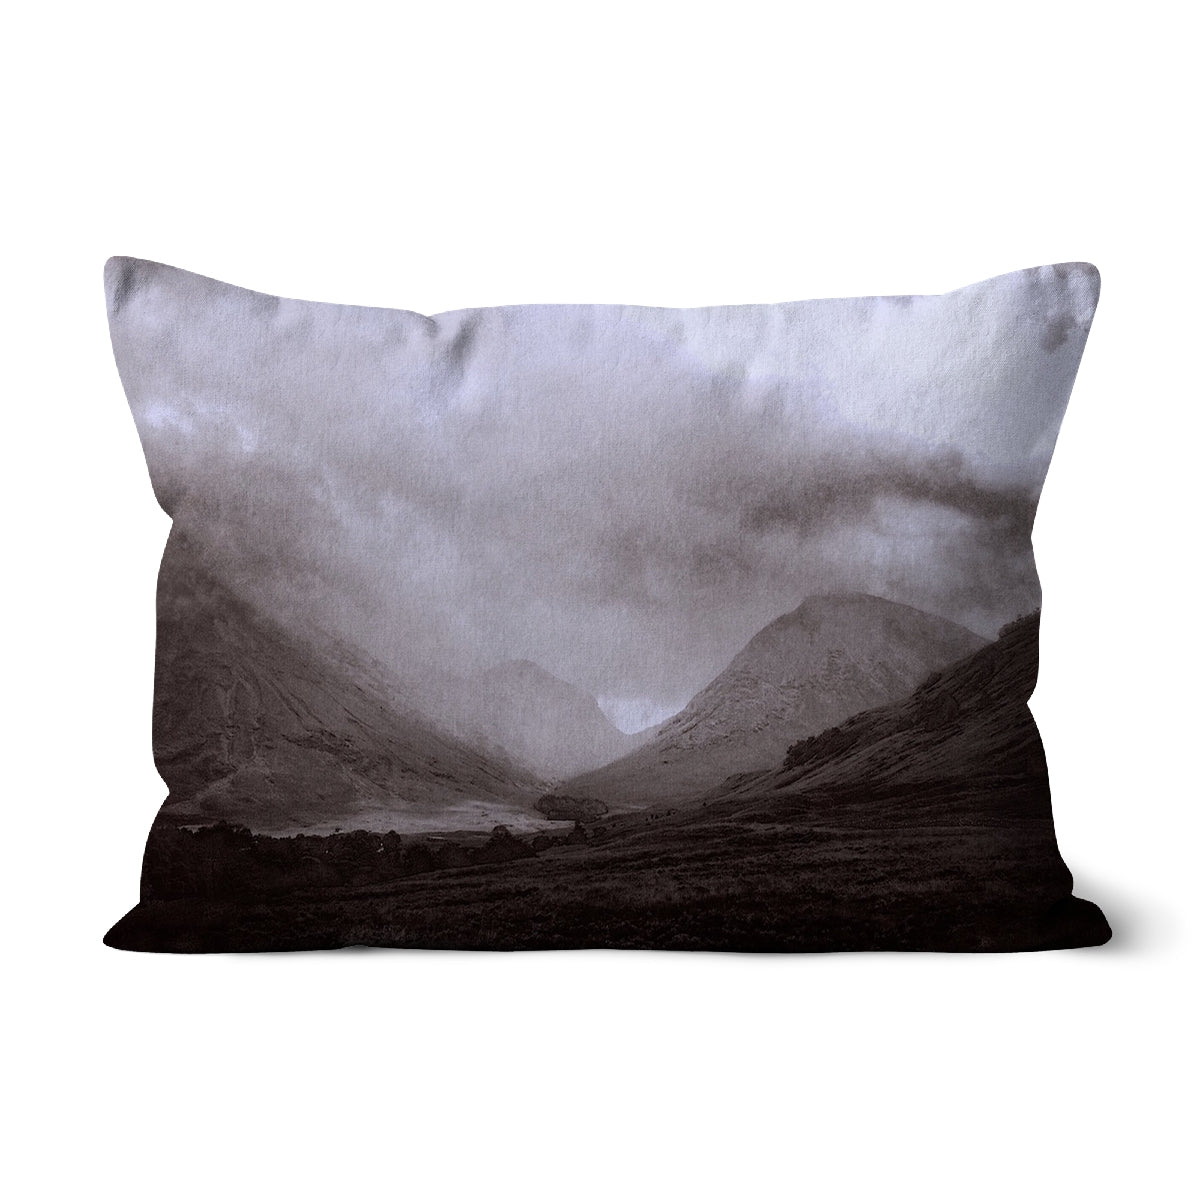 Glencoe Mist Art Gifts Cushion-Cushions-Glencoe Art Gallery-Faux Suede-19"x13"-Paintings, Prints, Homeware, Art Gifts From Scotland By Scottish Artist Kevin Hunter